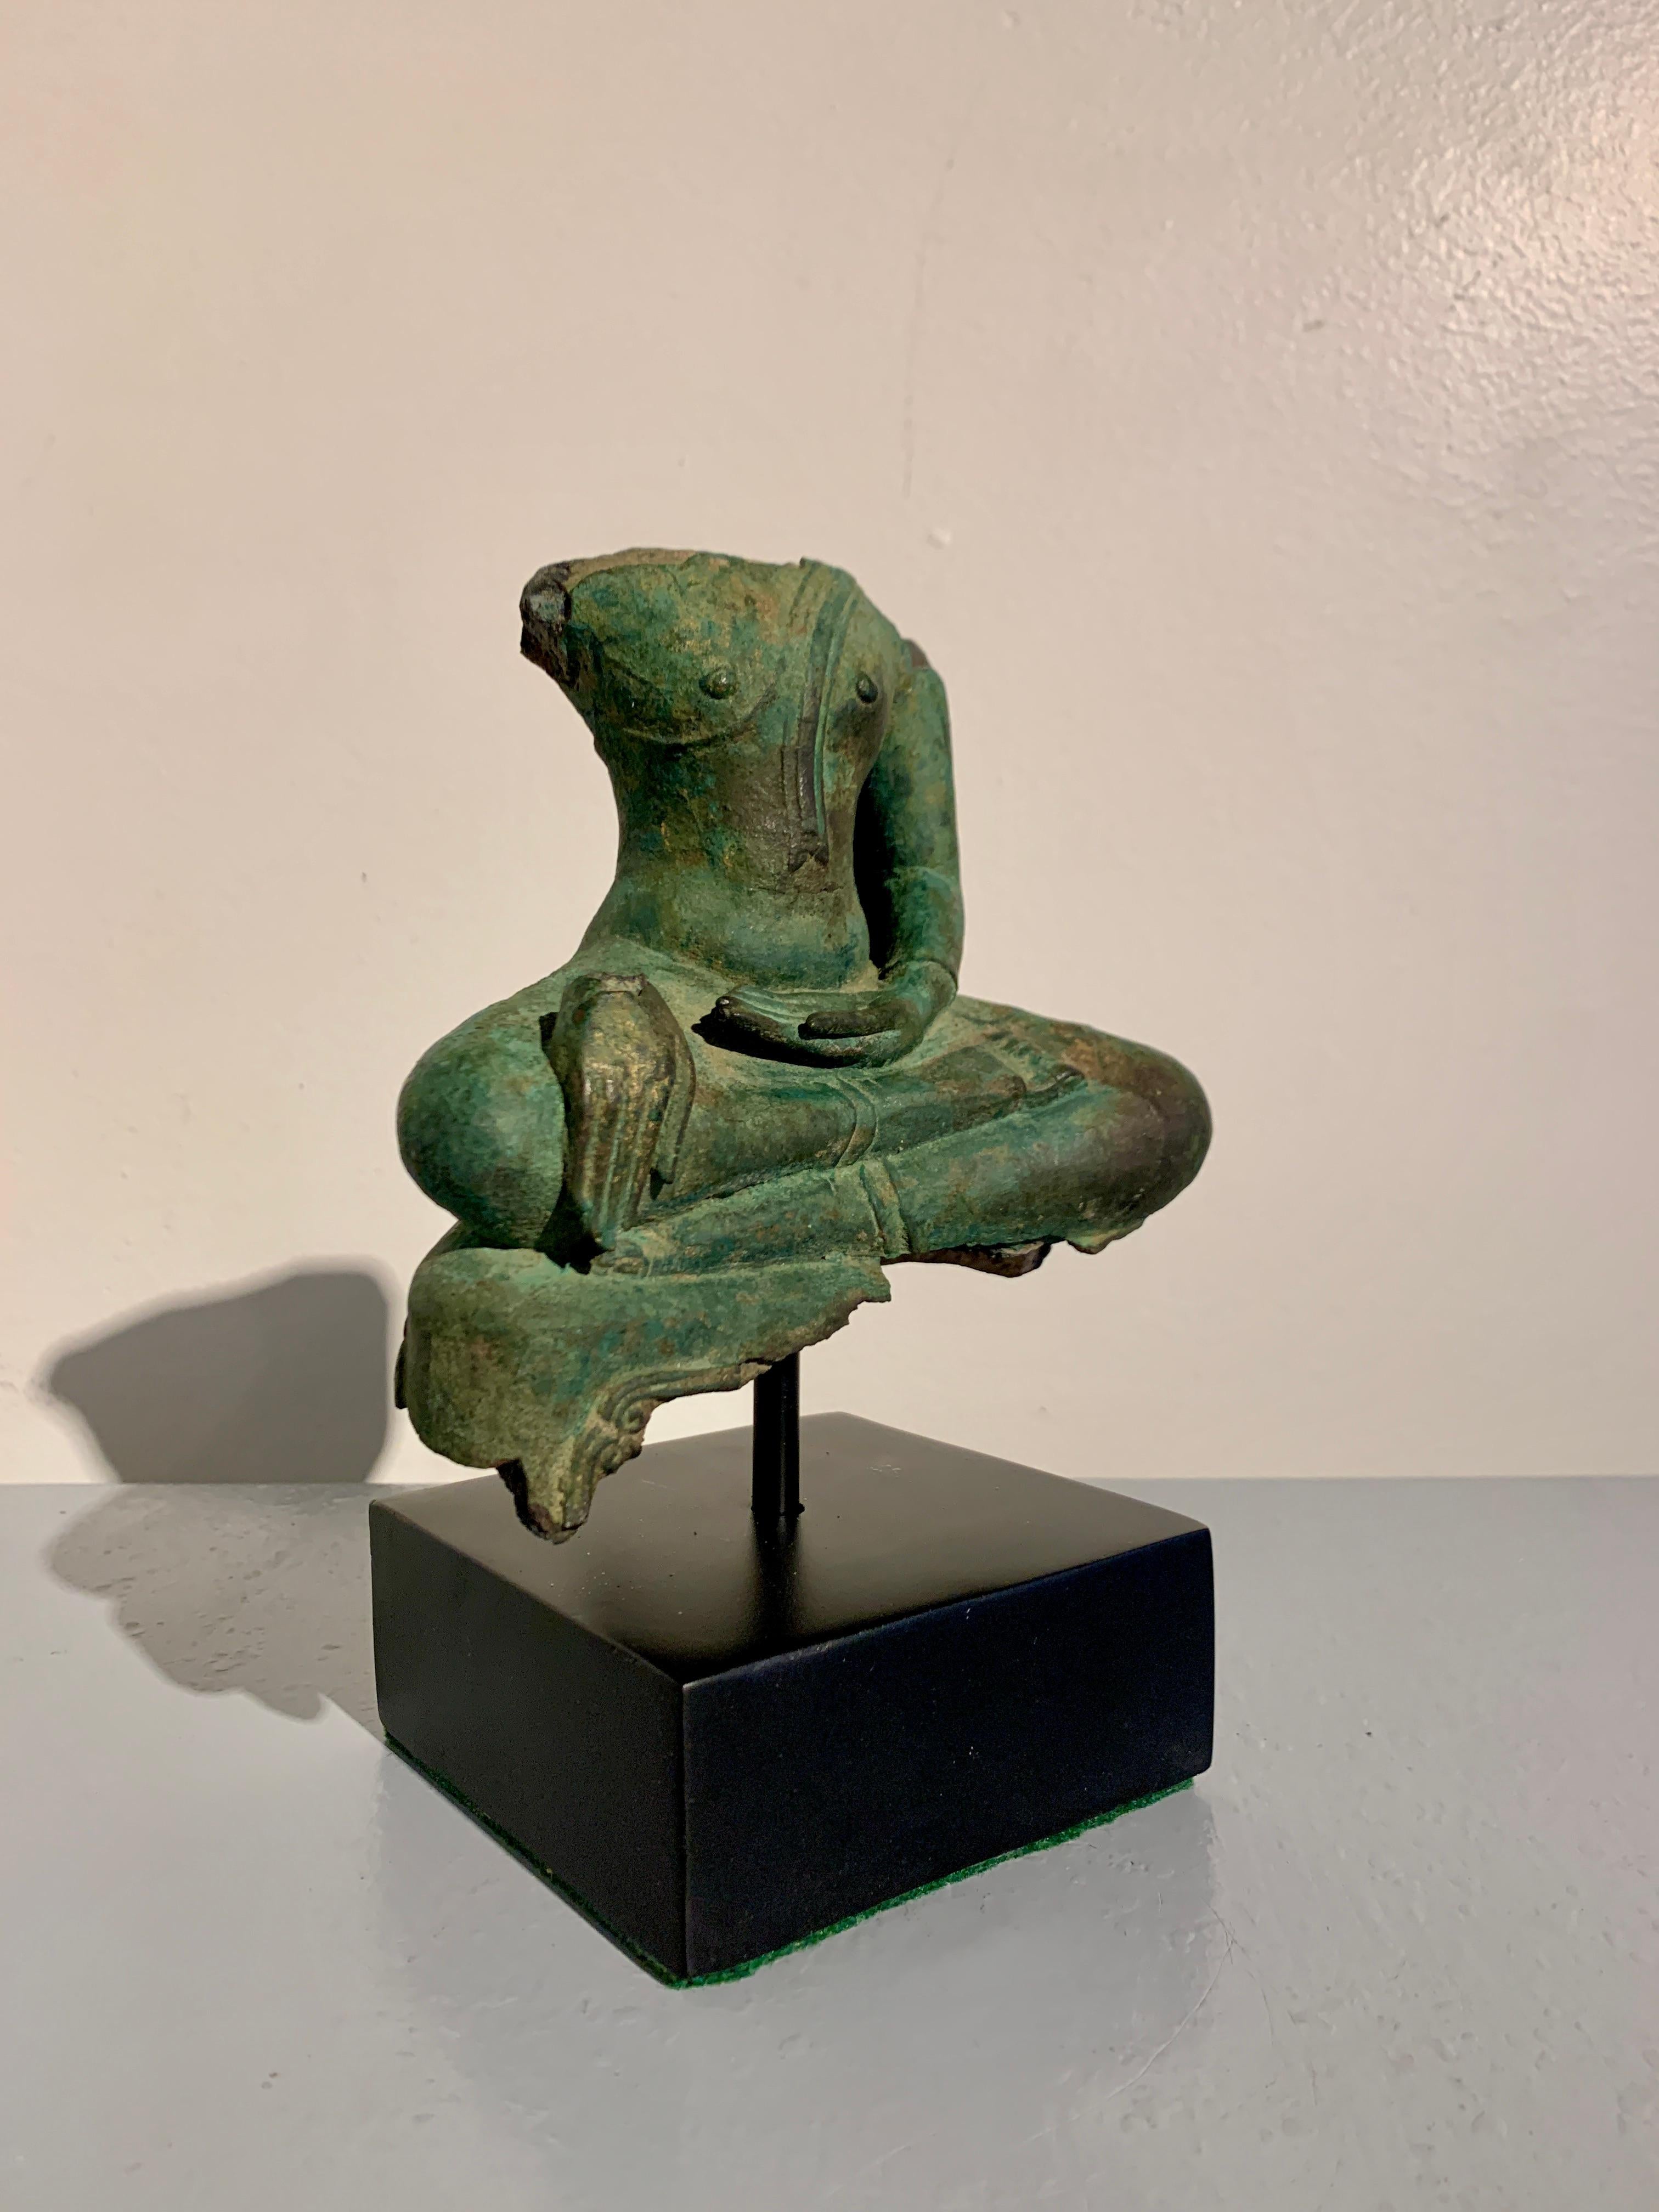 An enigmatic and ephemeral Thai cast bronze fragment of a seated Buddha, Sukhothai Kingdom, circa 15th/16th century, Thailand.

The fragment depicts the historical Buddha, Shakyamuni. The upper half of his torso, from the shoulders up, is missing,